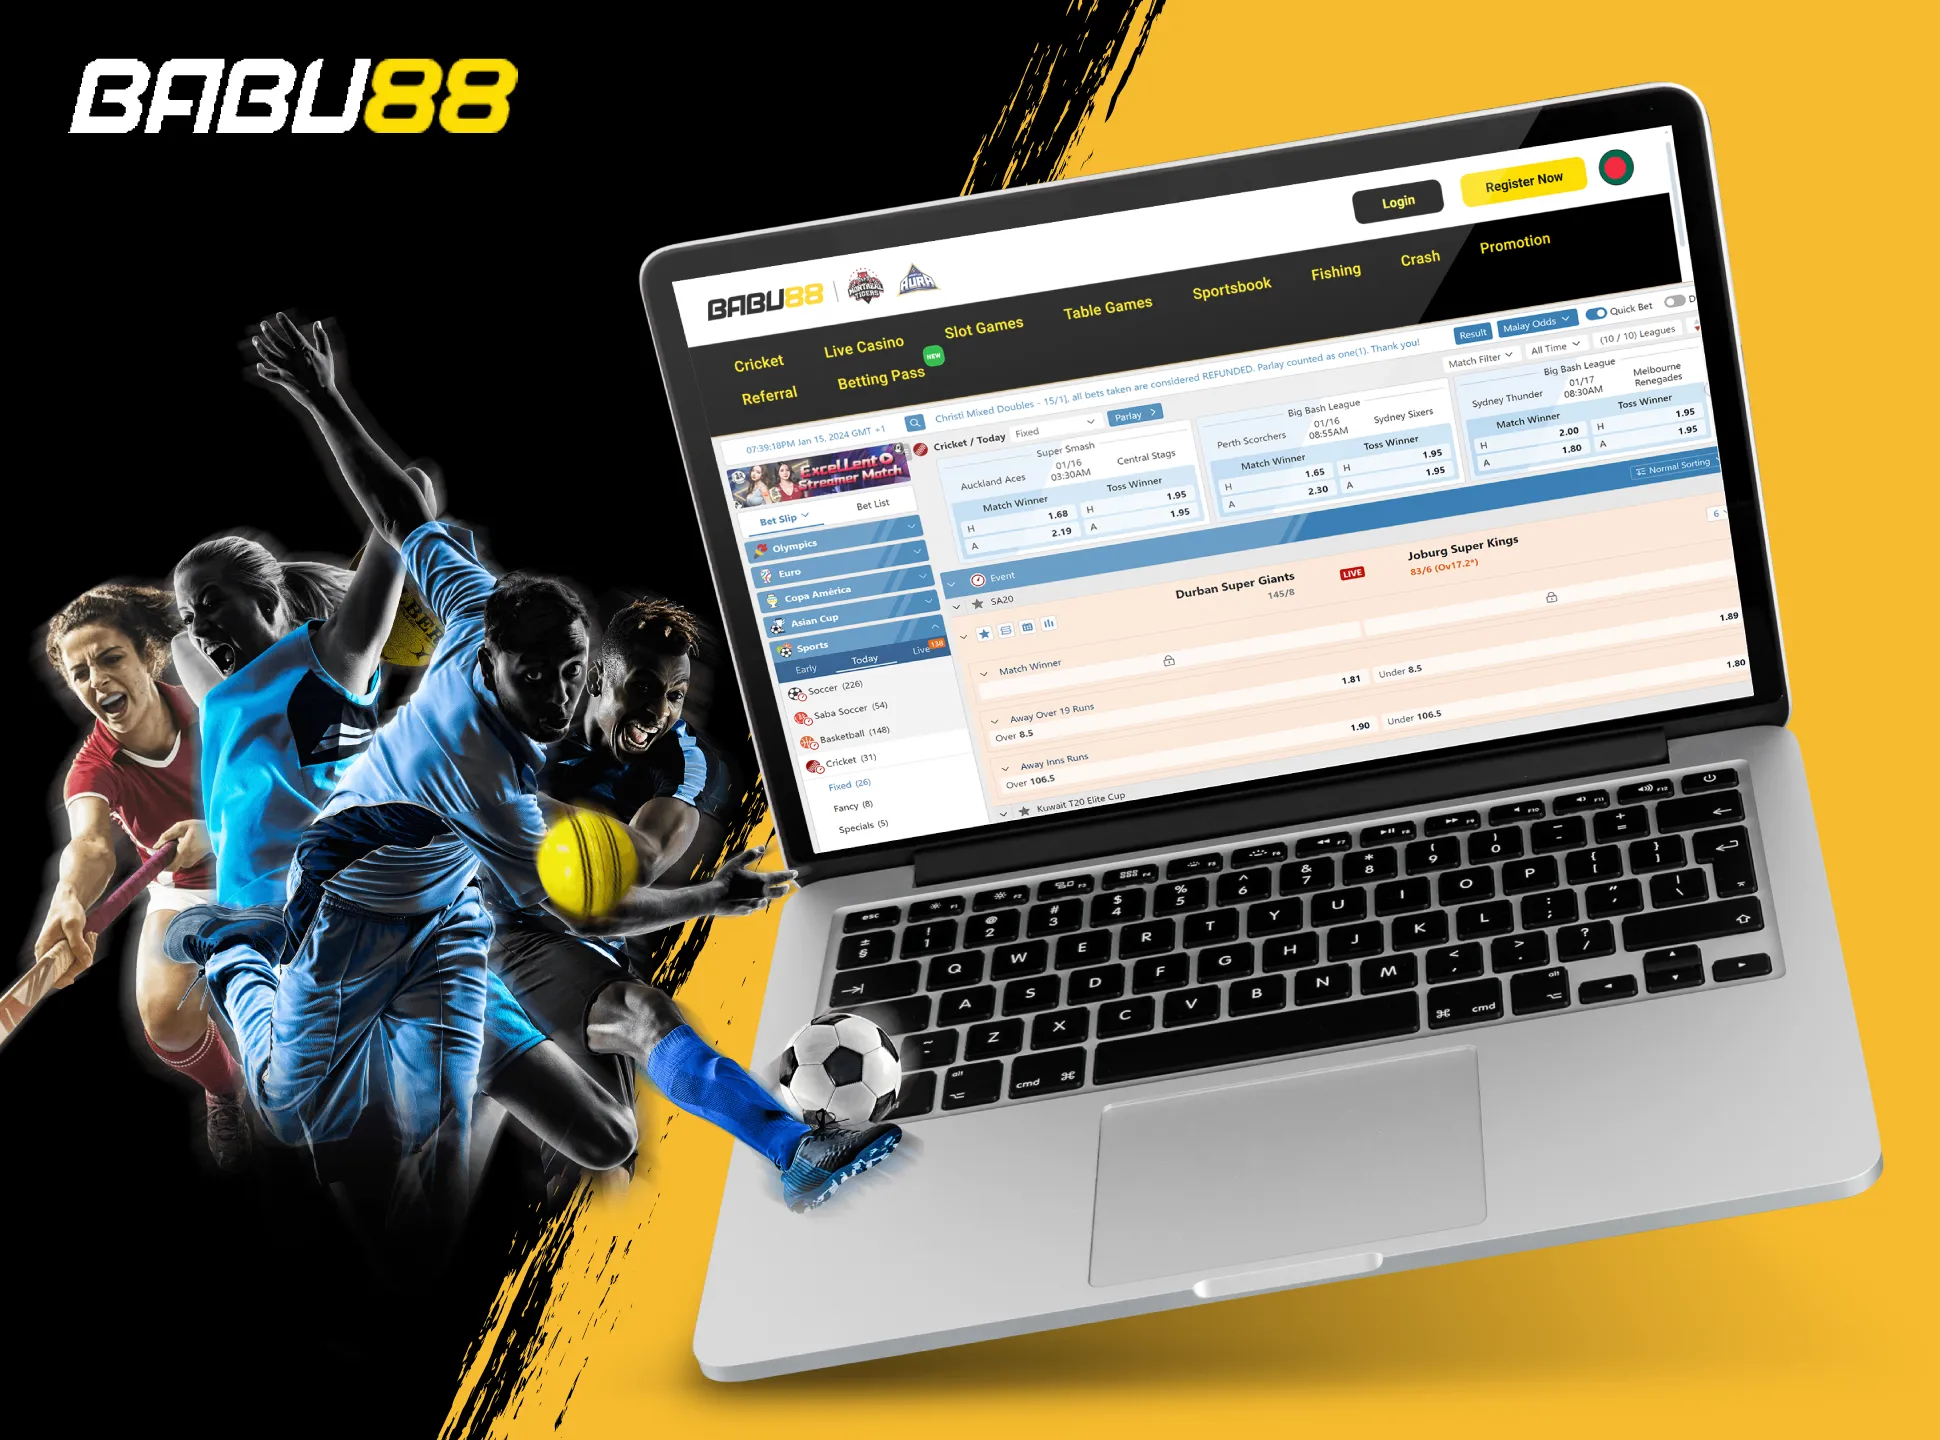 Babu88 has a great choice of events in various sports to bet on.